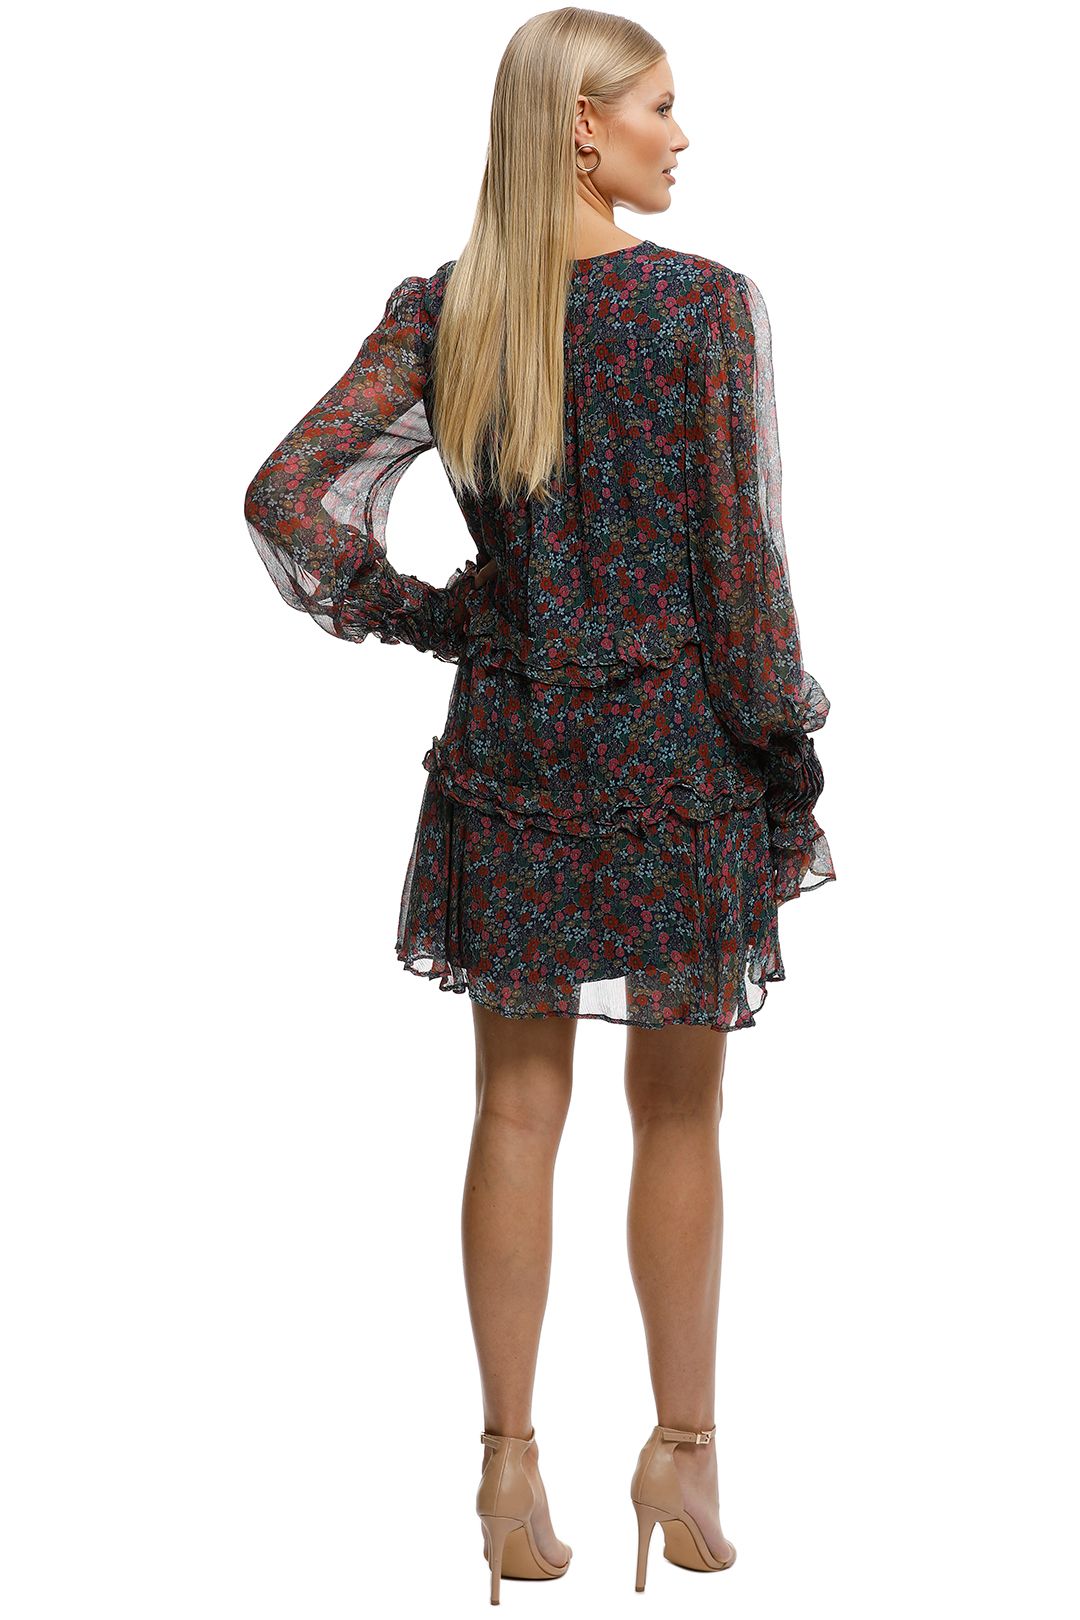 Stevie May-Mercy LS Mini-Blue Floral-Back